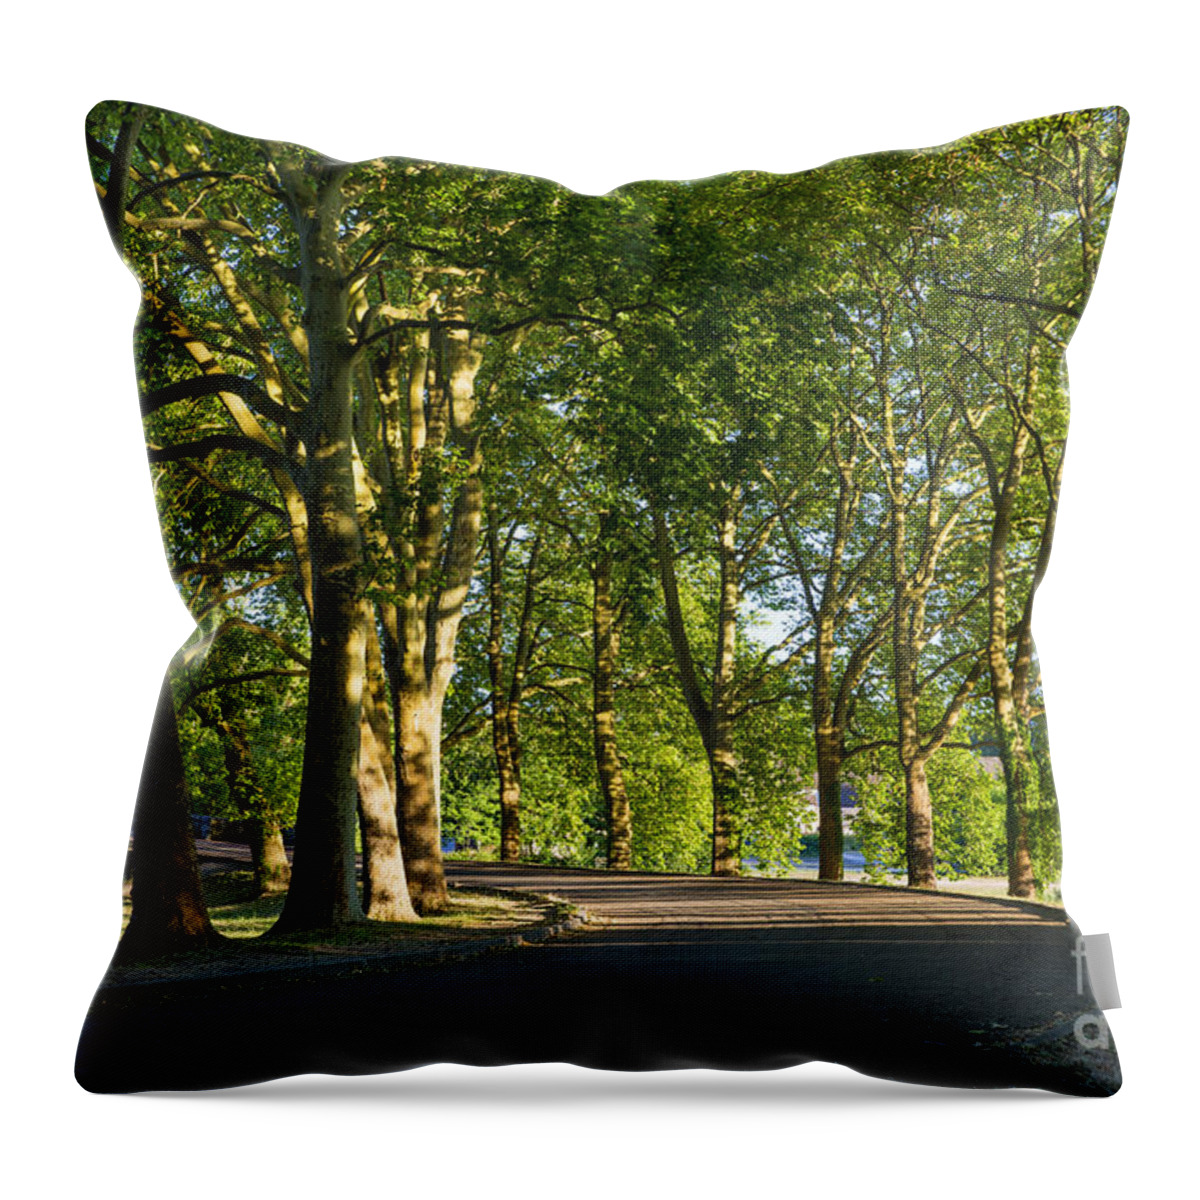 France Throw Pillow featuring the photograph Tree-lined Avenue by Brian Jannsen